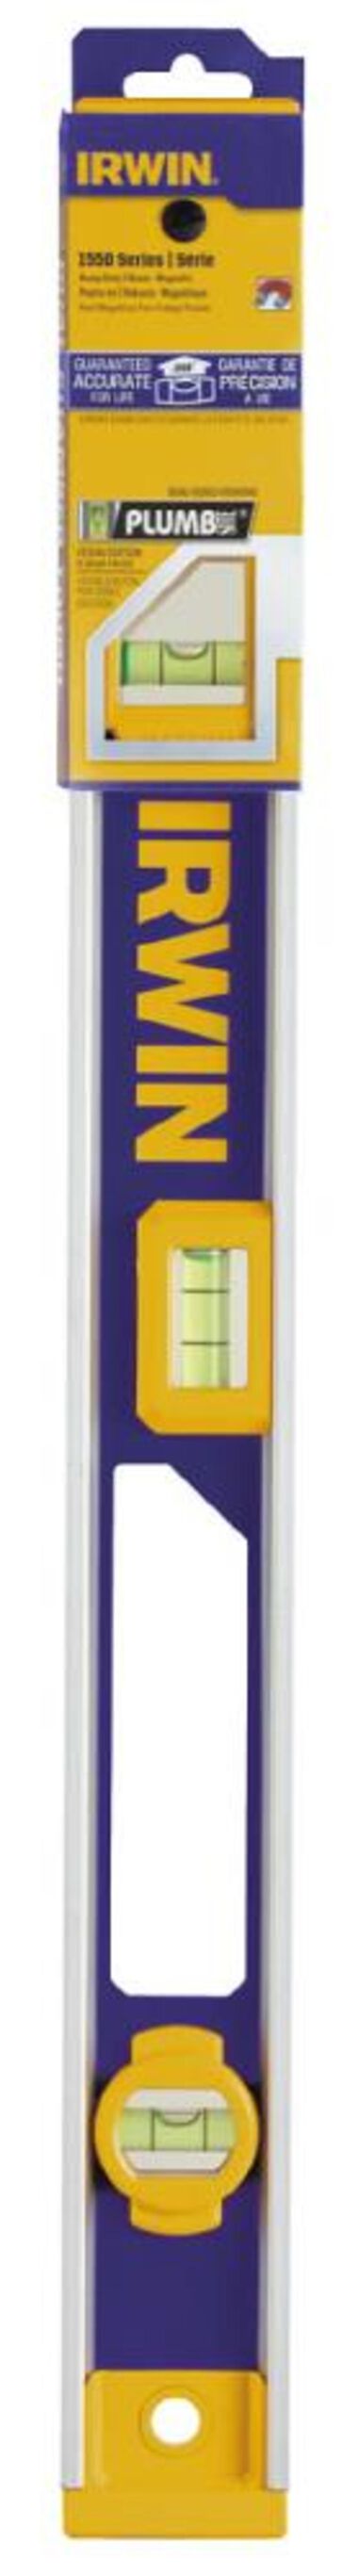 Irwin 24 In. 1550 Magnetic I-Beam Level, large image number 0